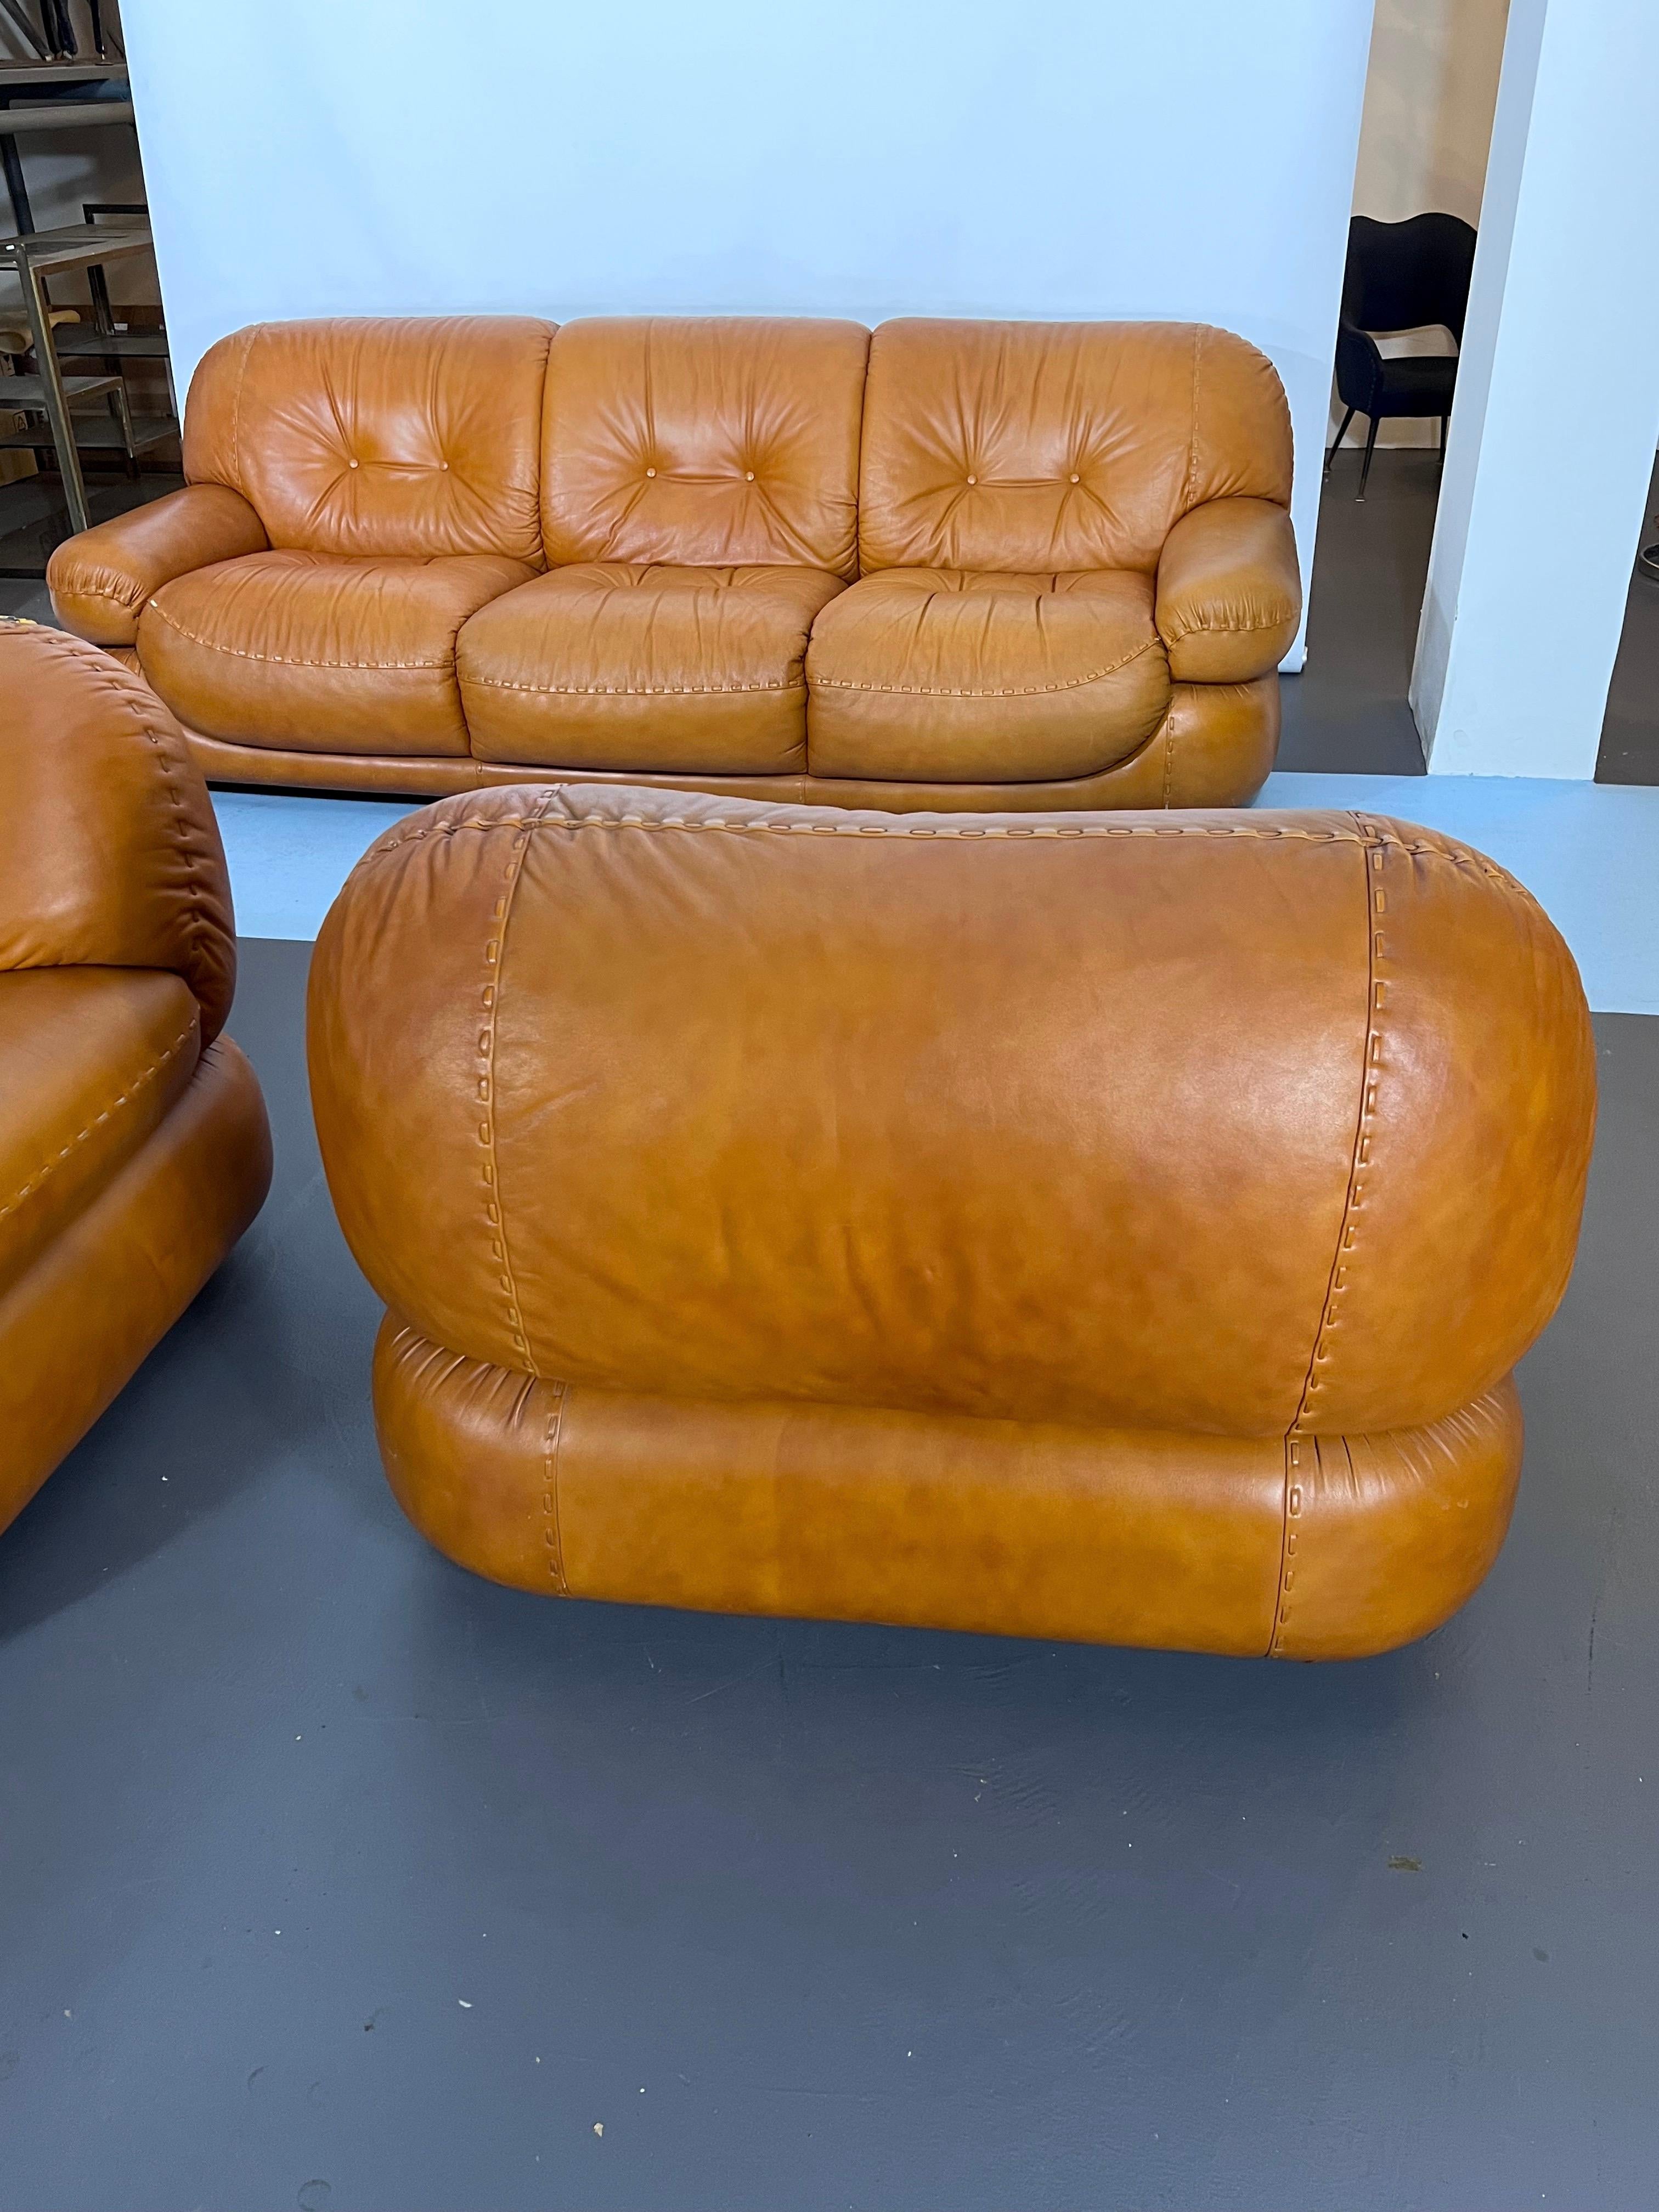 20th Century Vintage Sofa Set in Cognac Leather by Sapporo for Mobil Girgi, Italy, 1970s For Sale